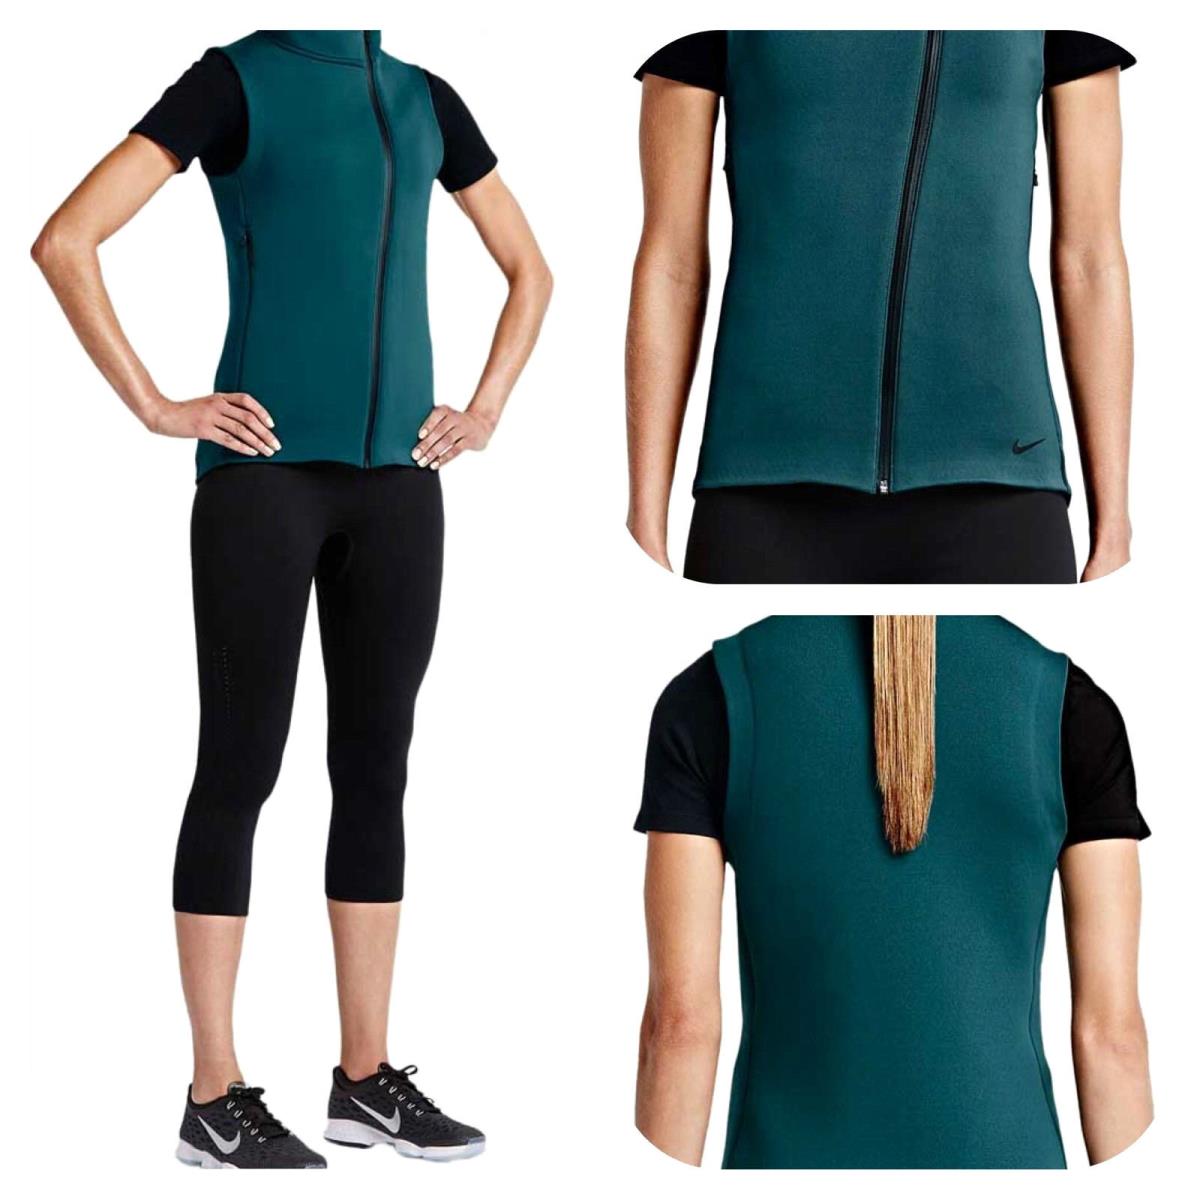 Nike sz XS Women`s Therma-sphere Max Training Vest 718910 307 Teal